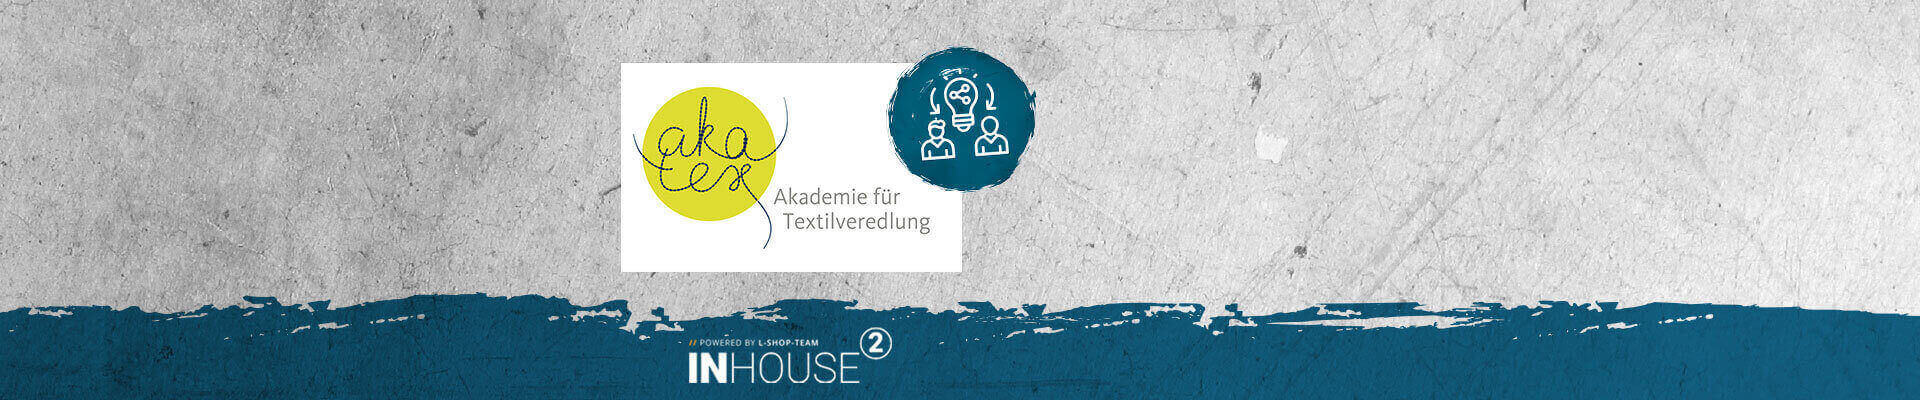 Save your tickets now! Attend seminars at INHOUSE² and expand your expertise